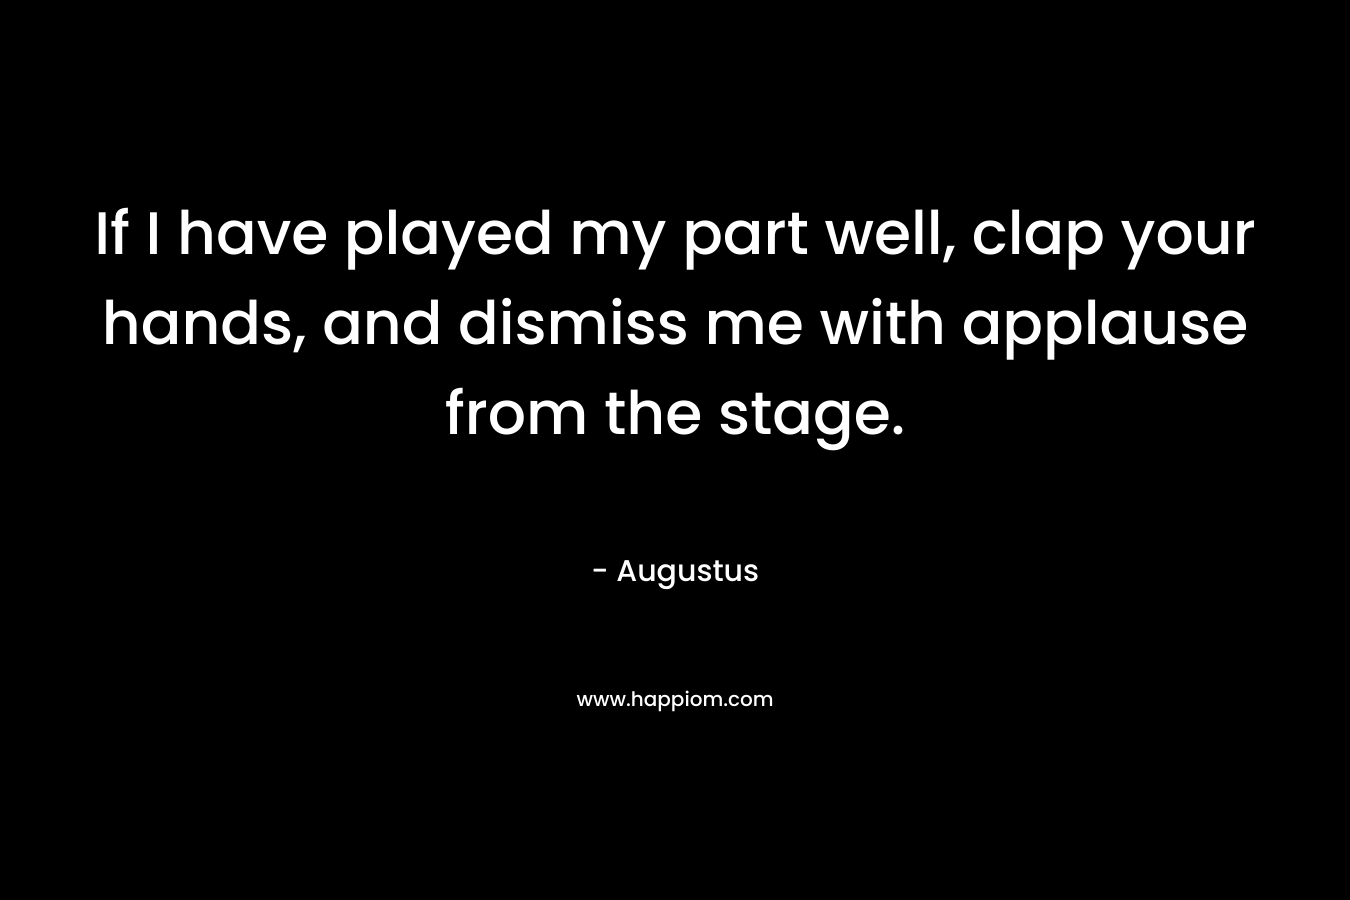 If I have played my part well, clap your hands, and dismiss me with applause from the stage.